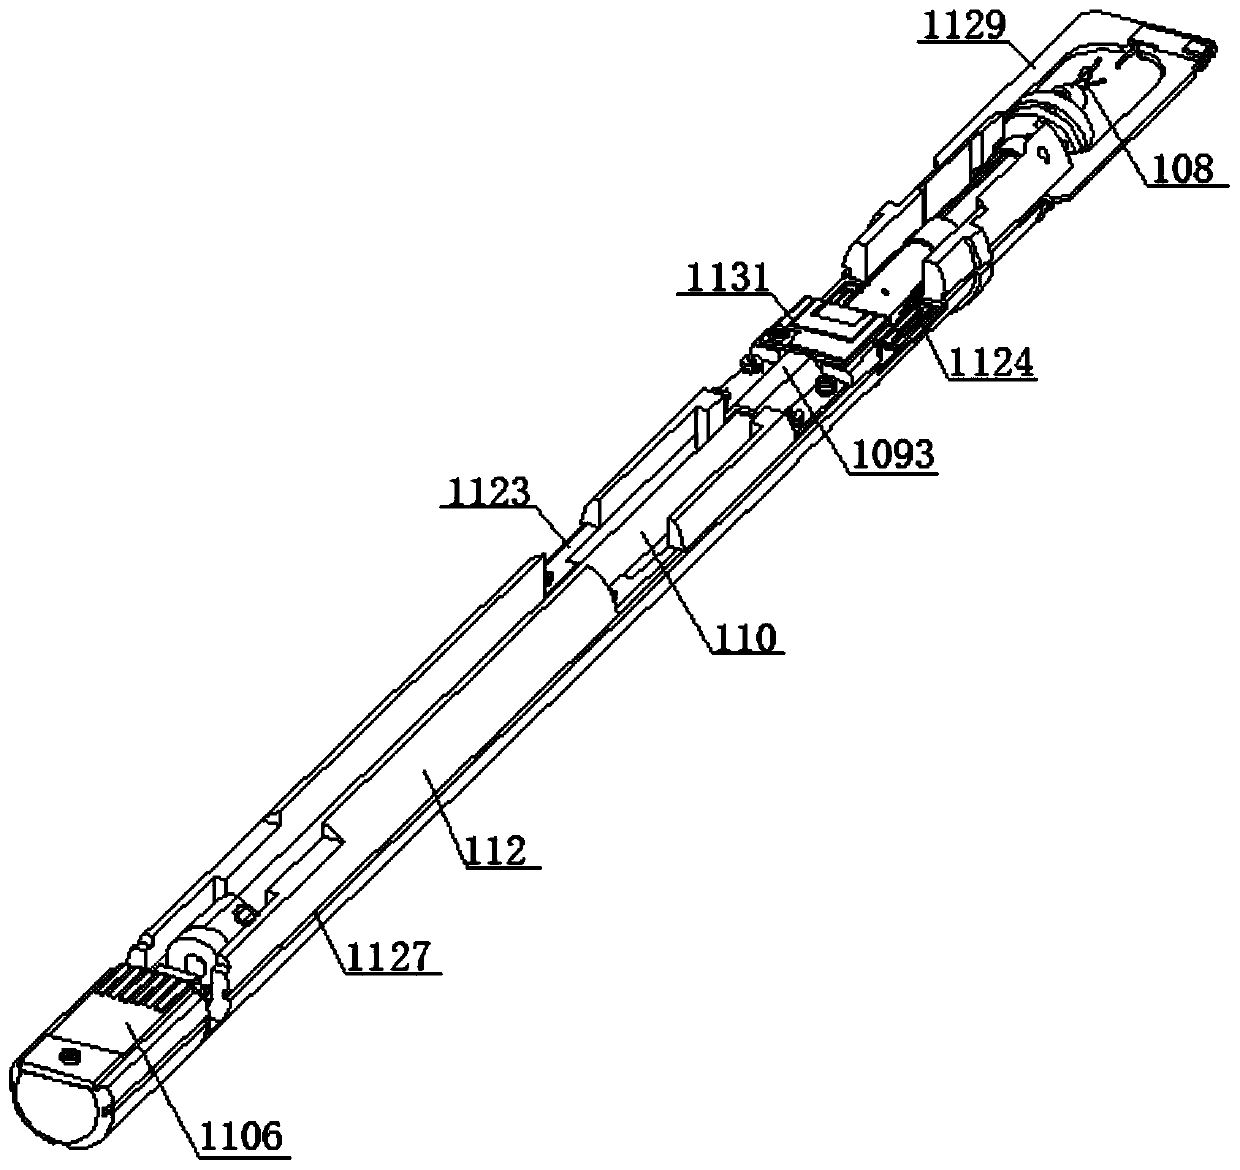 Multi-degree-of-freedom sample rod with sample clamping nozzle